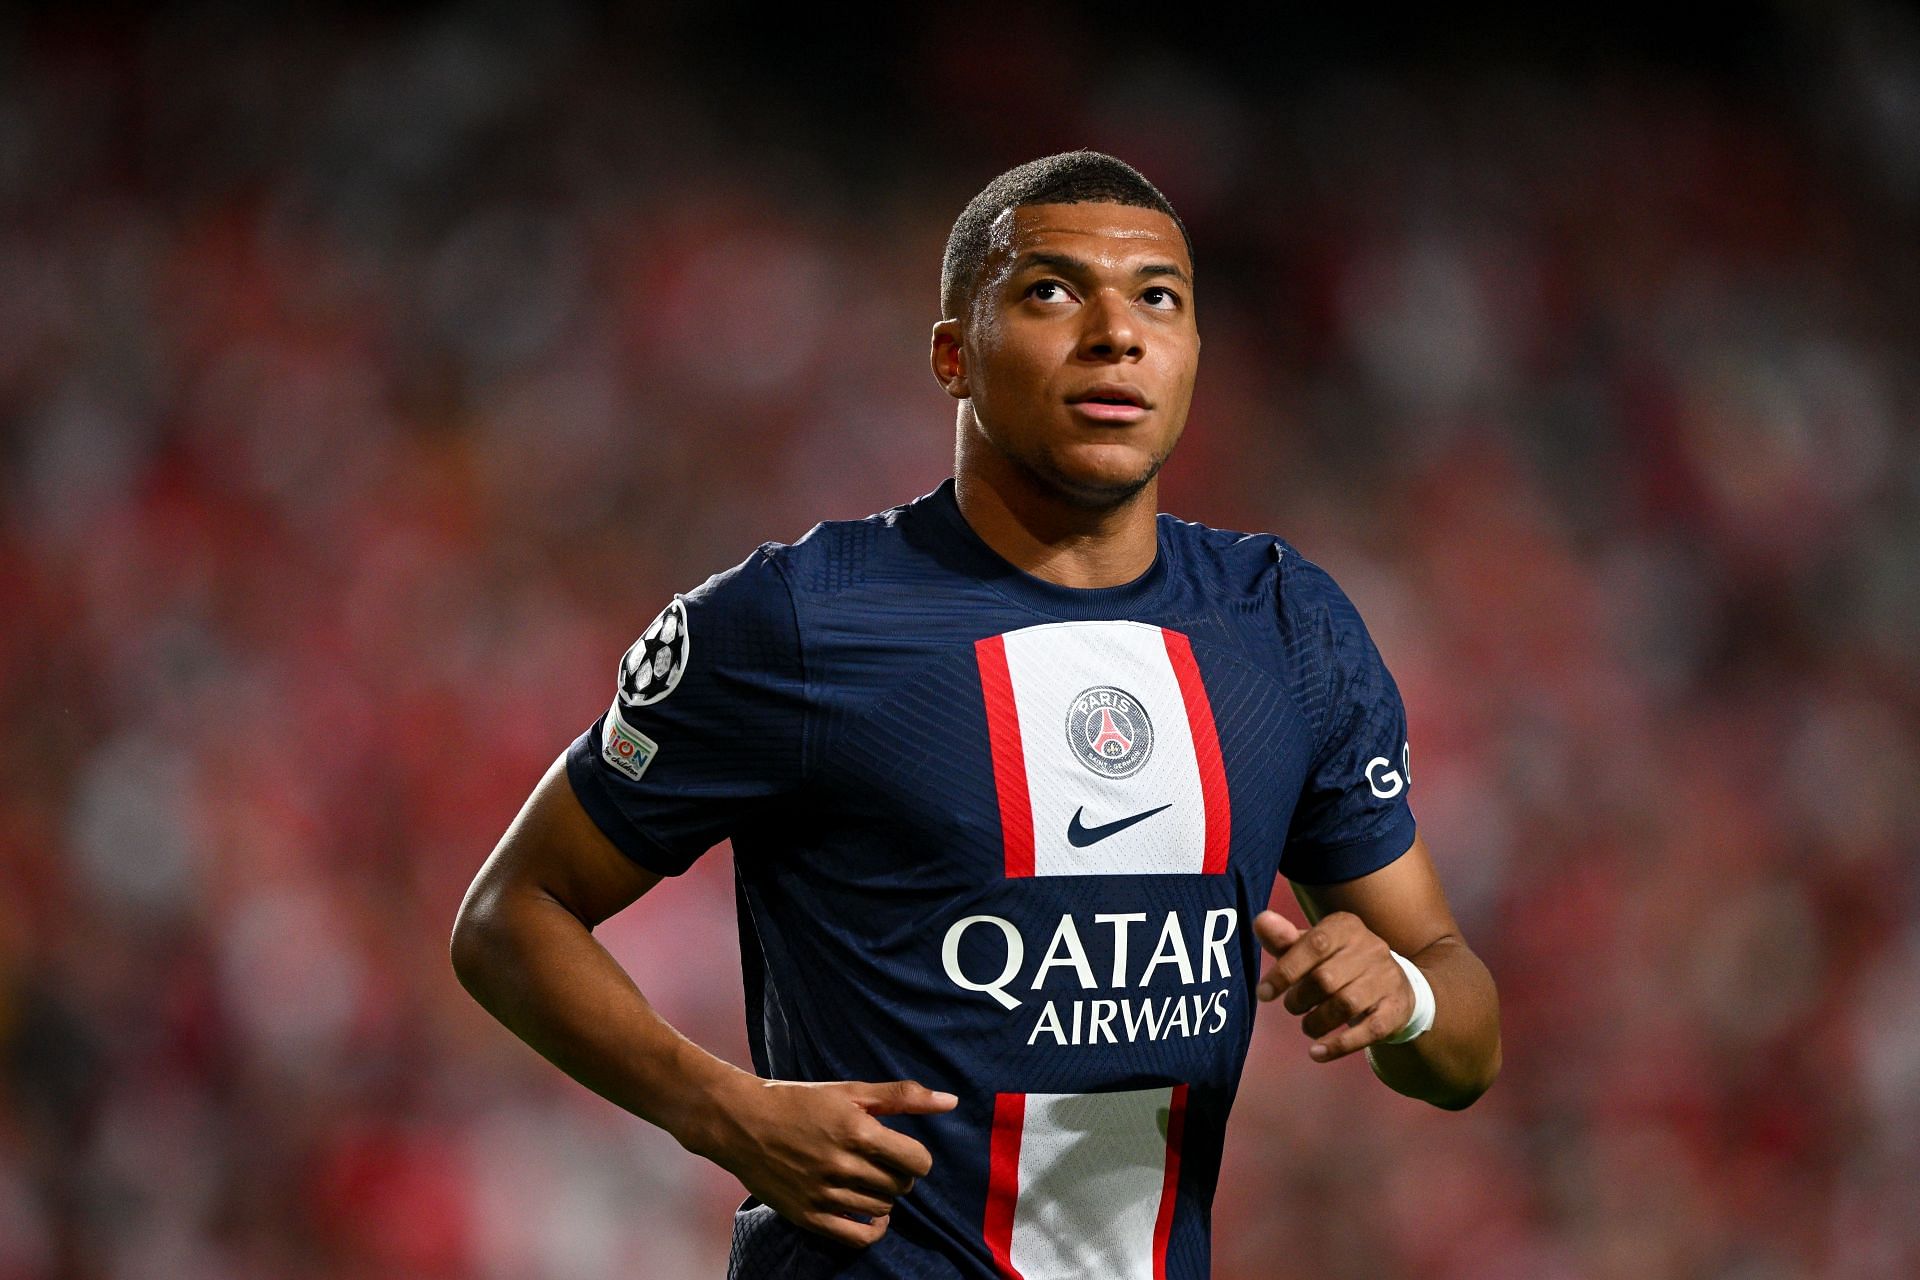 PSG superstar Kylian Mbappe rejected Real Madrid this summer.